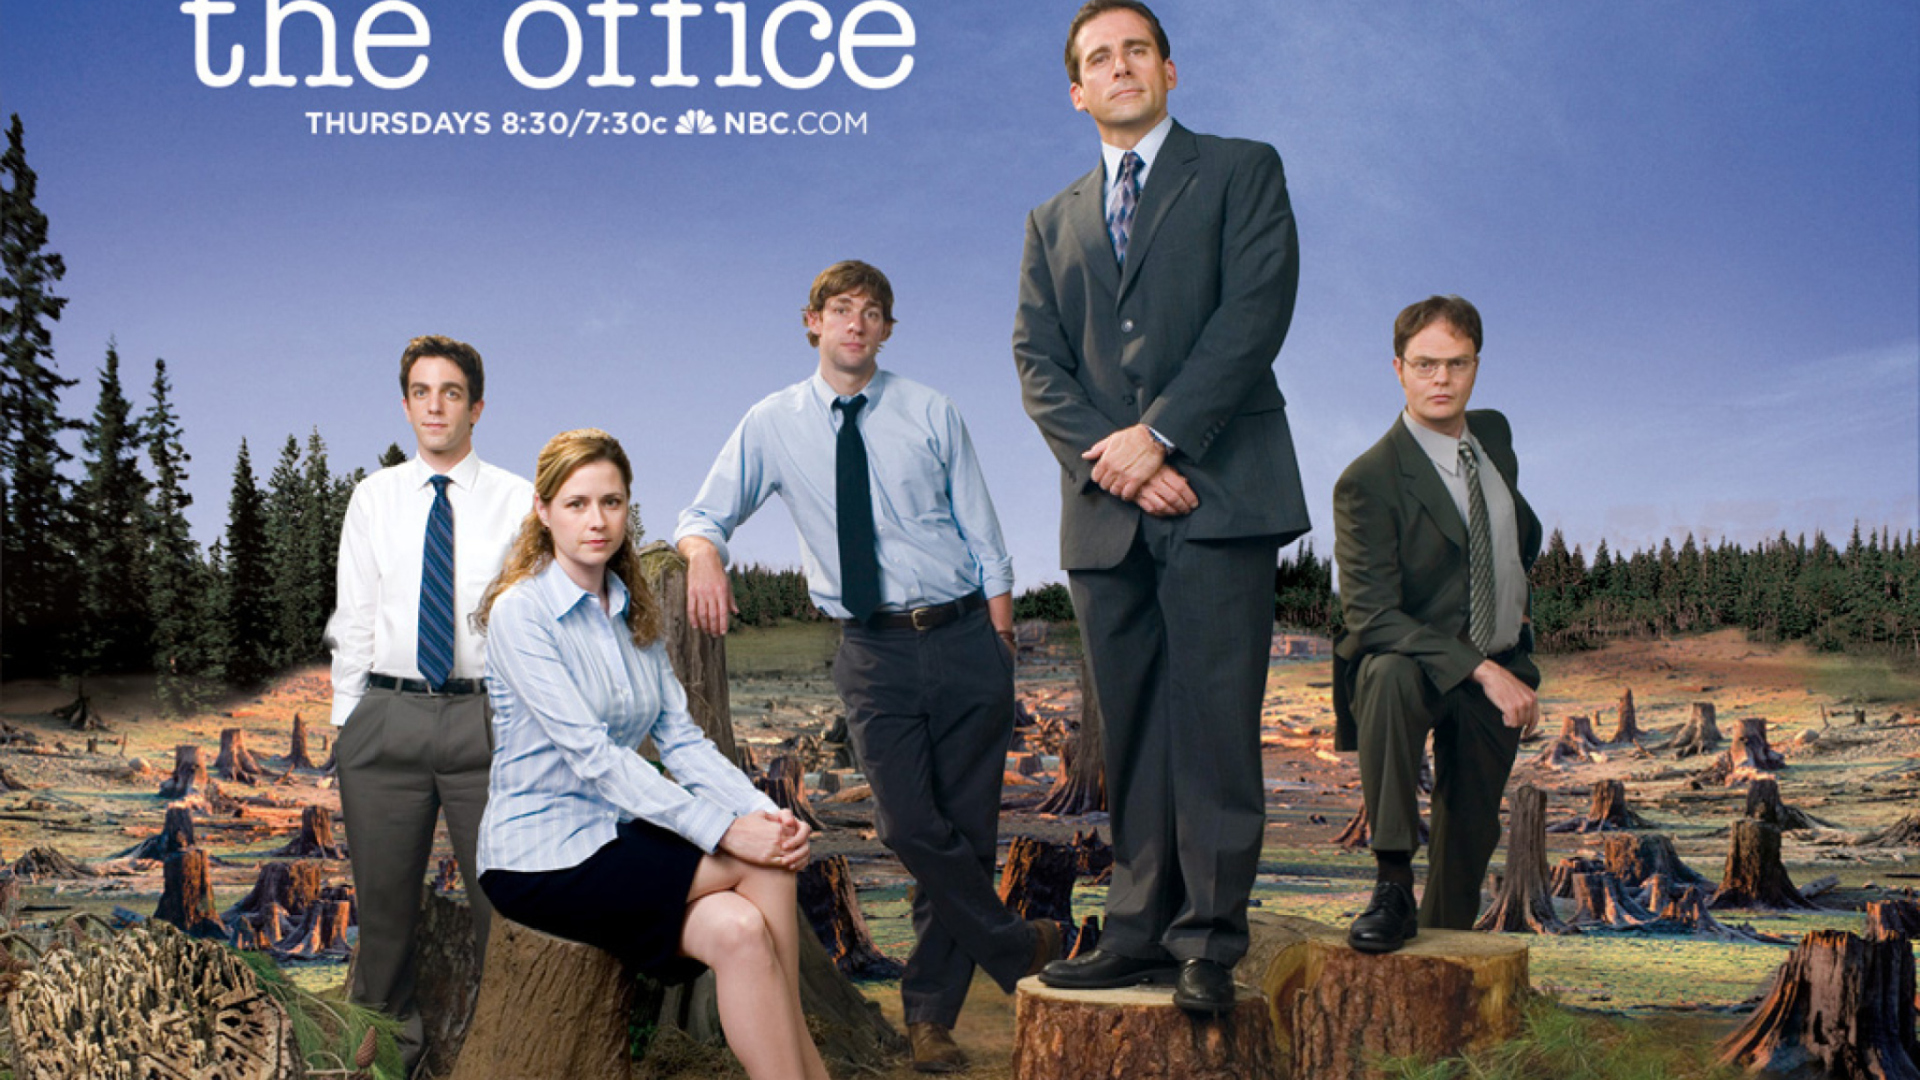 The Office wallpaper 1920x1080